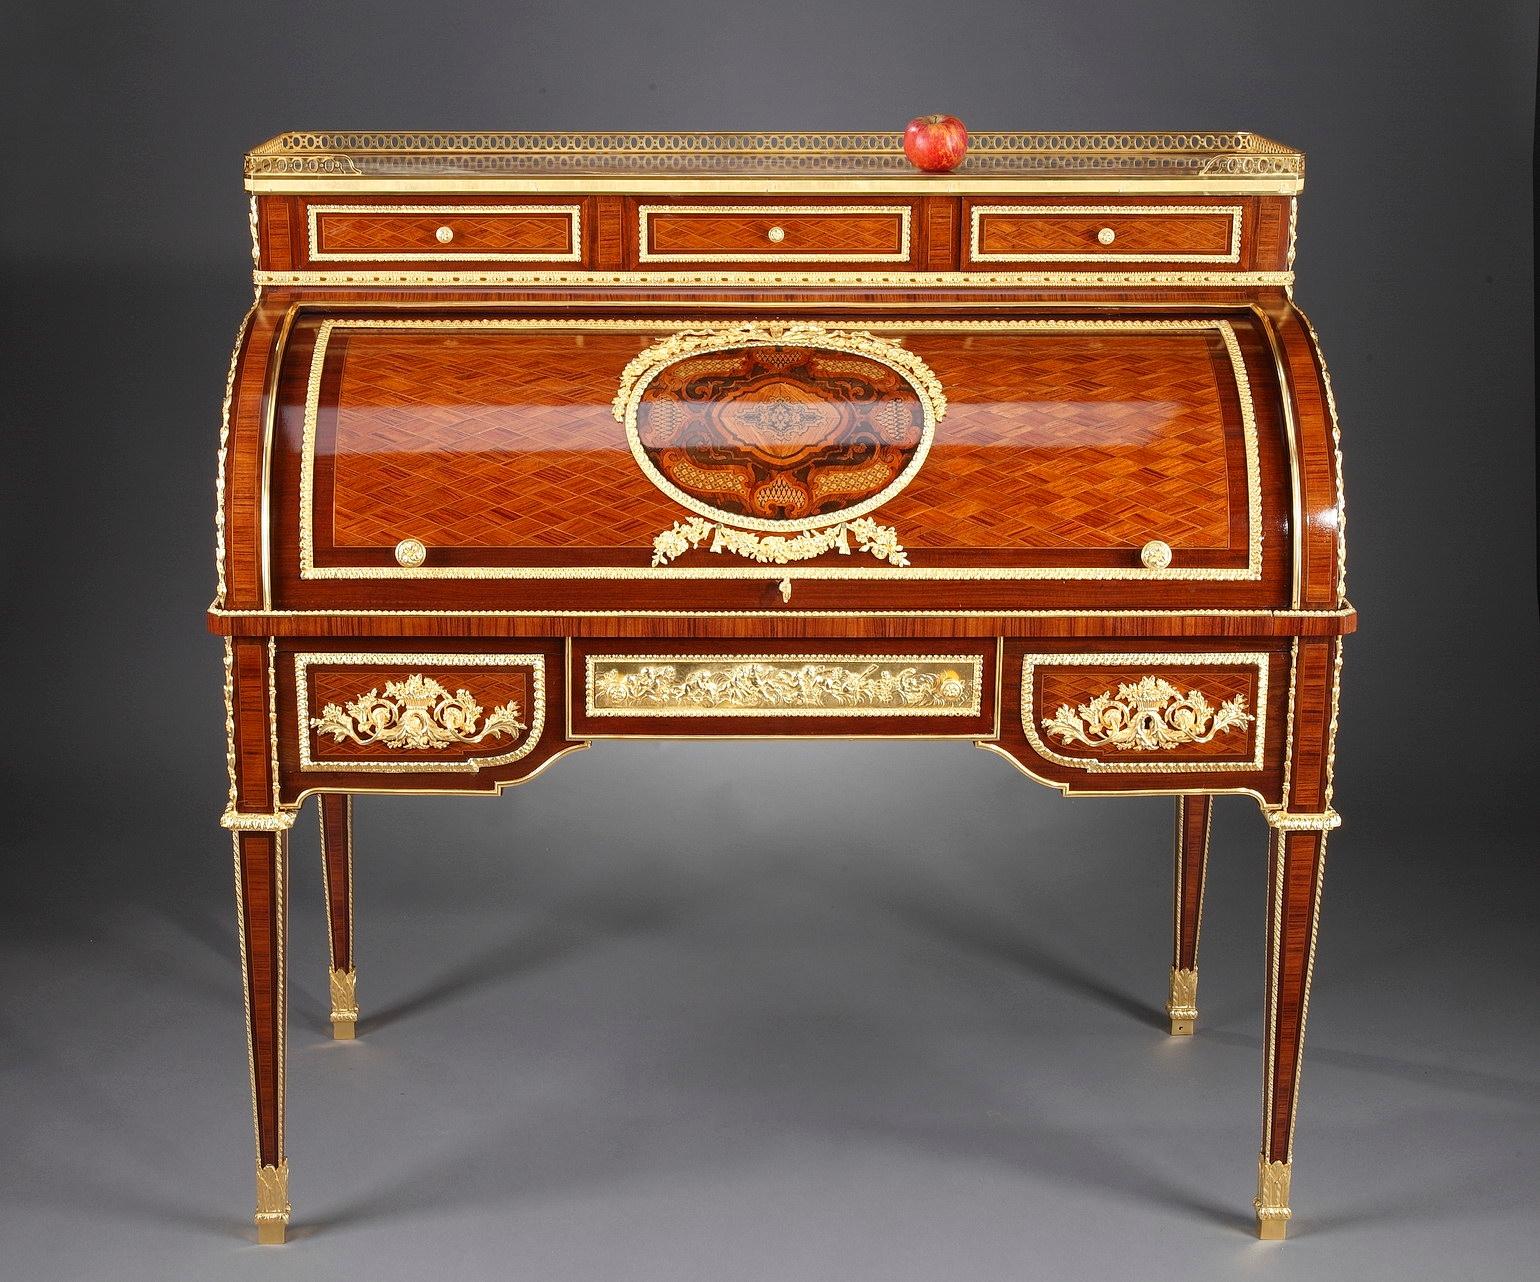 Remarkable Louis XVI style rolltop writing desk with marquetry latticework pattern. The front of the desk features six drawers. The rolling cover is embellished with a beautiful marquetry medallion surrounded by ormolu garlands. It opens to reveal